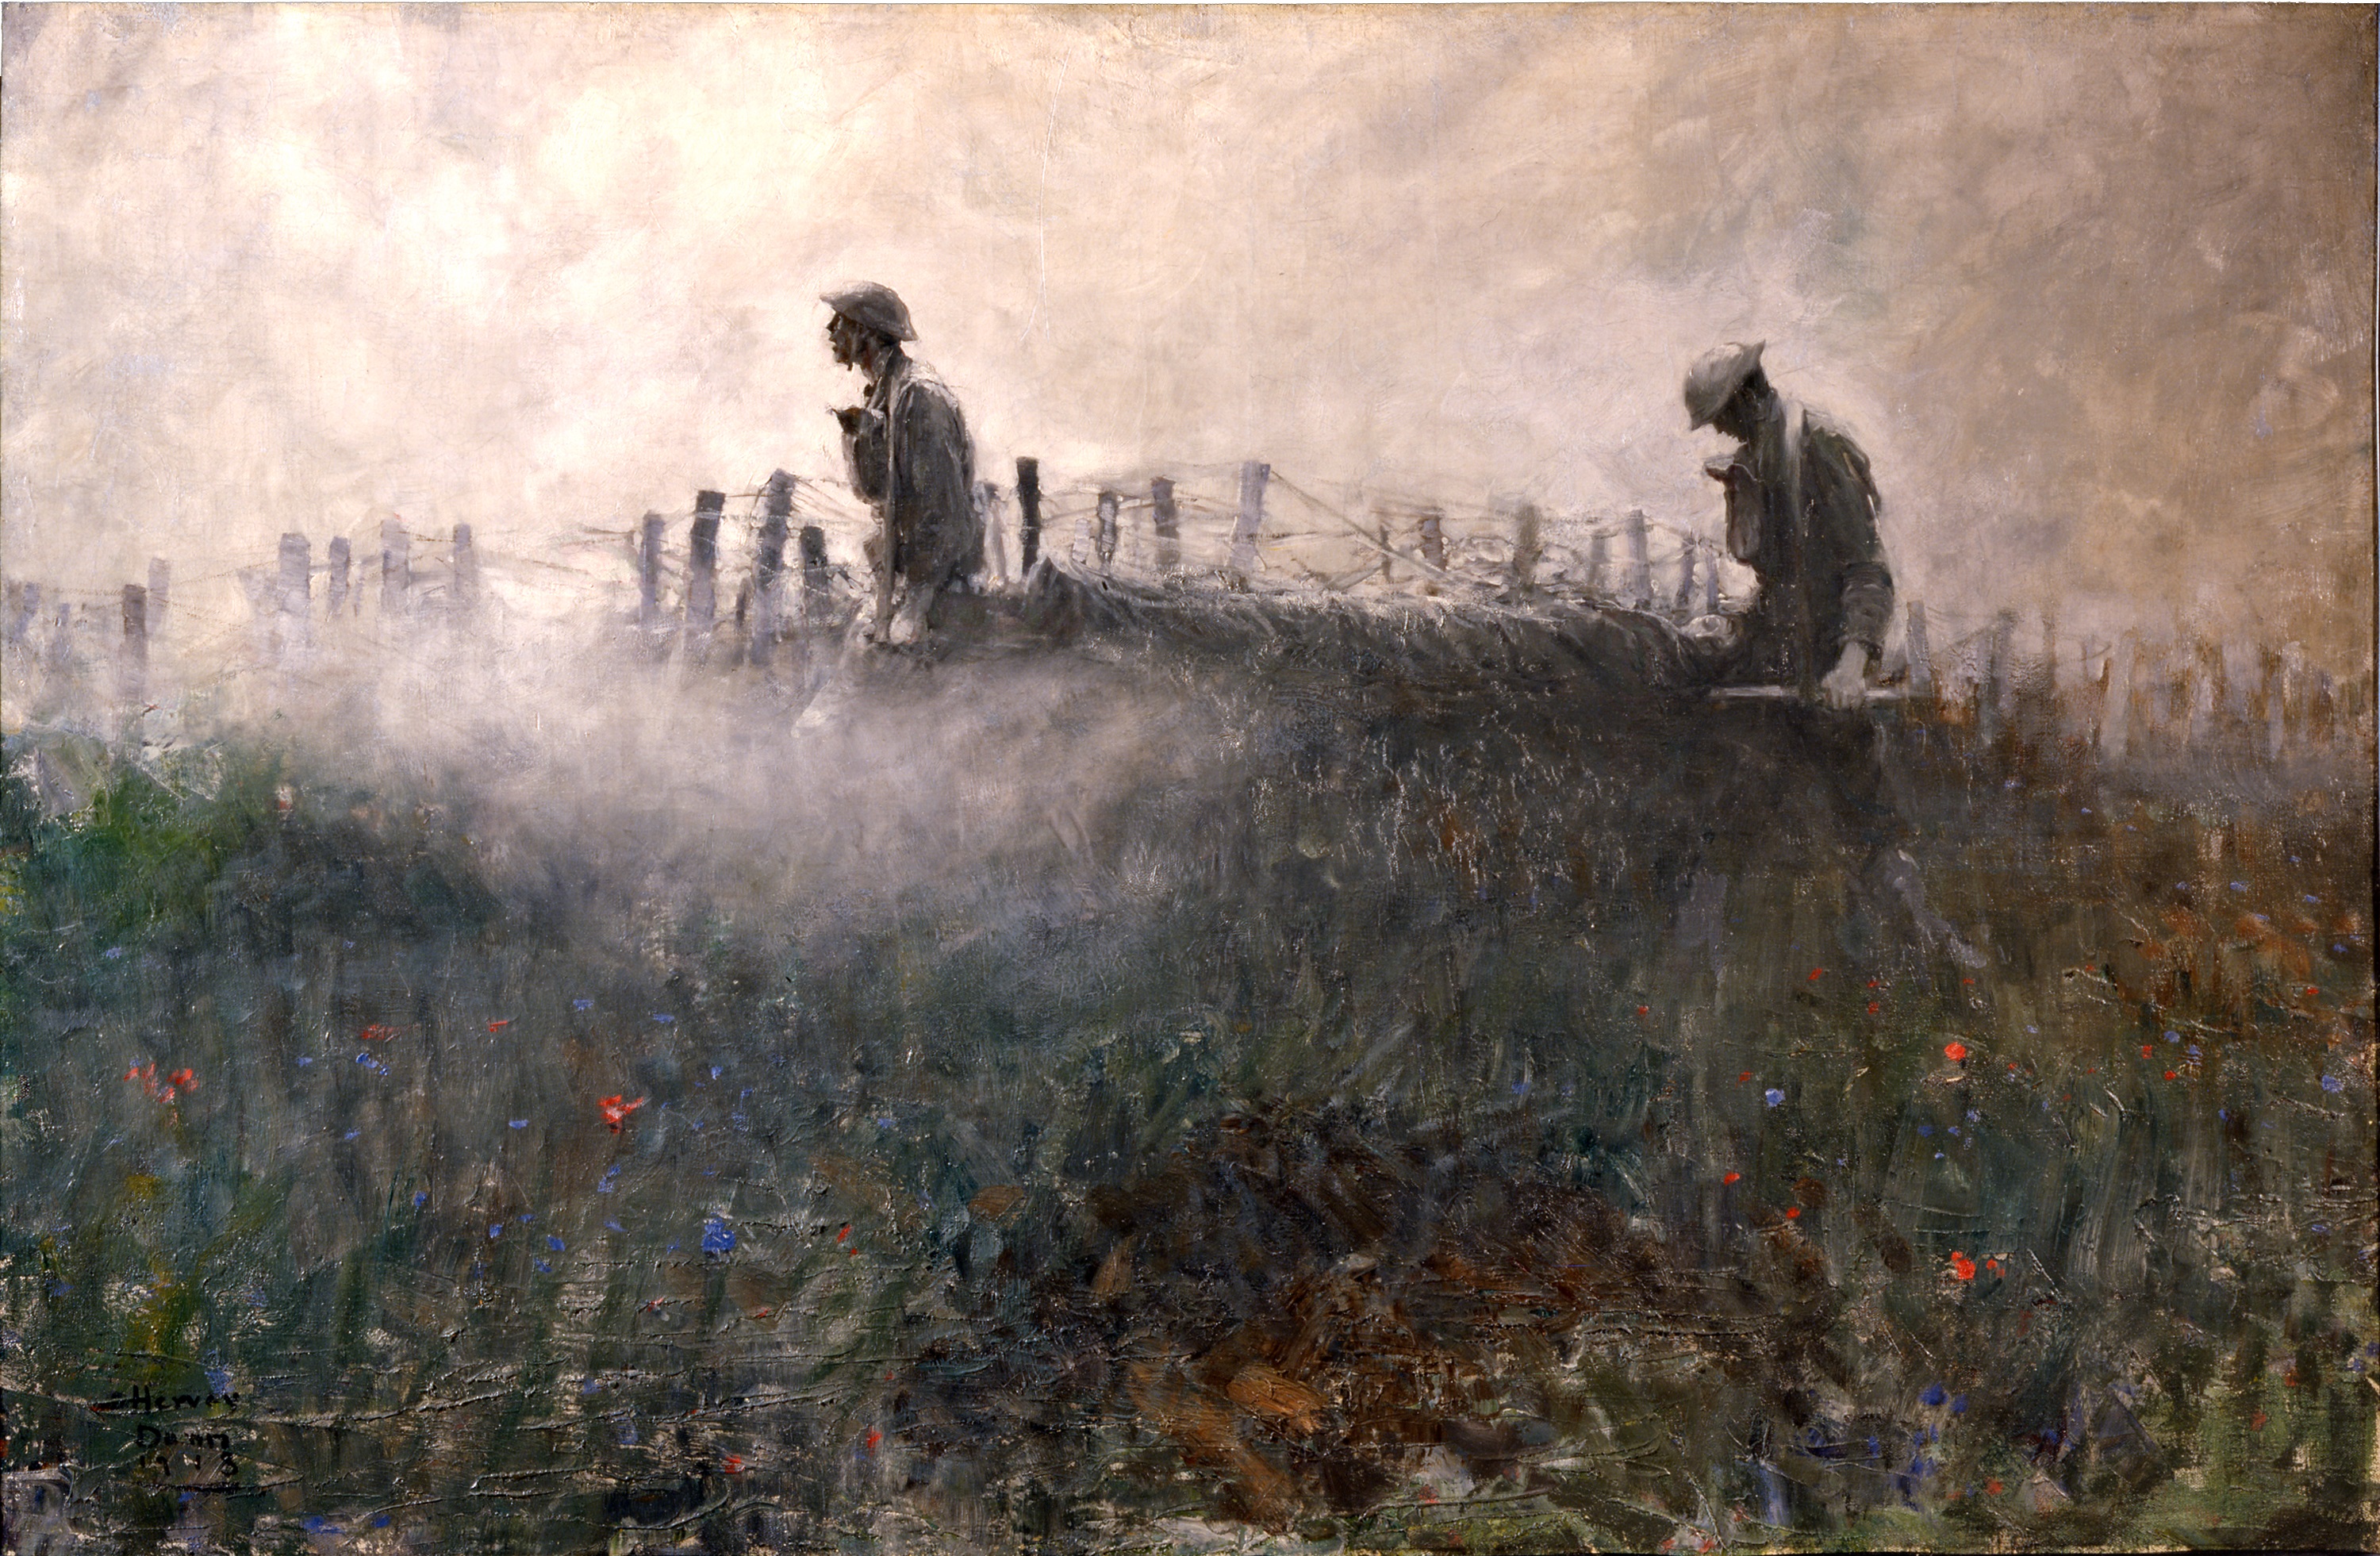 WWI Artwork from the Smithsonian